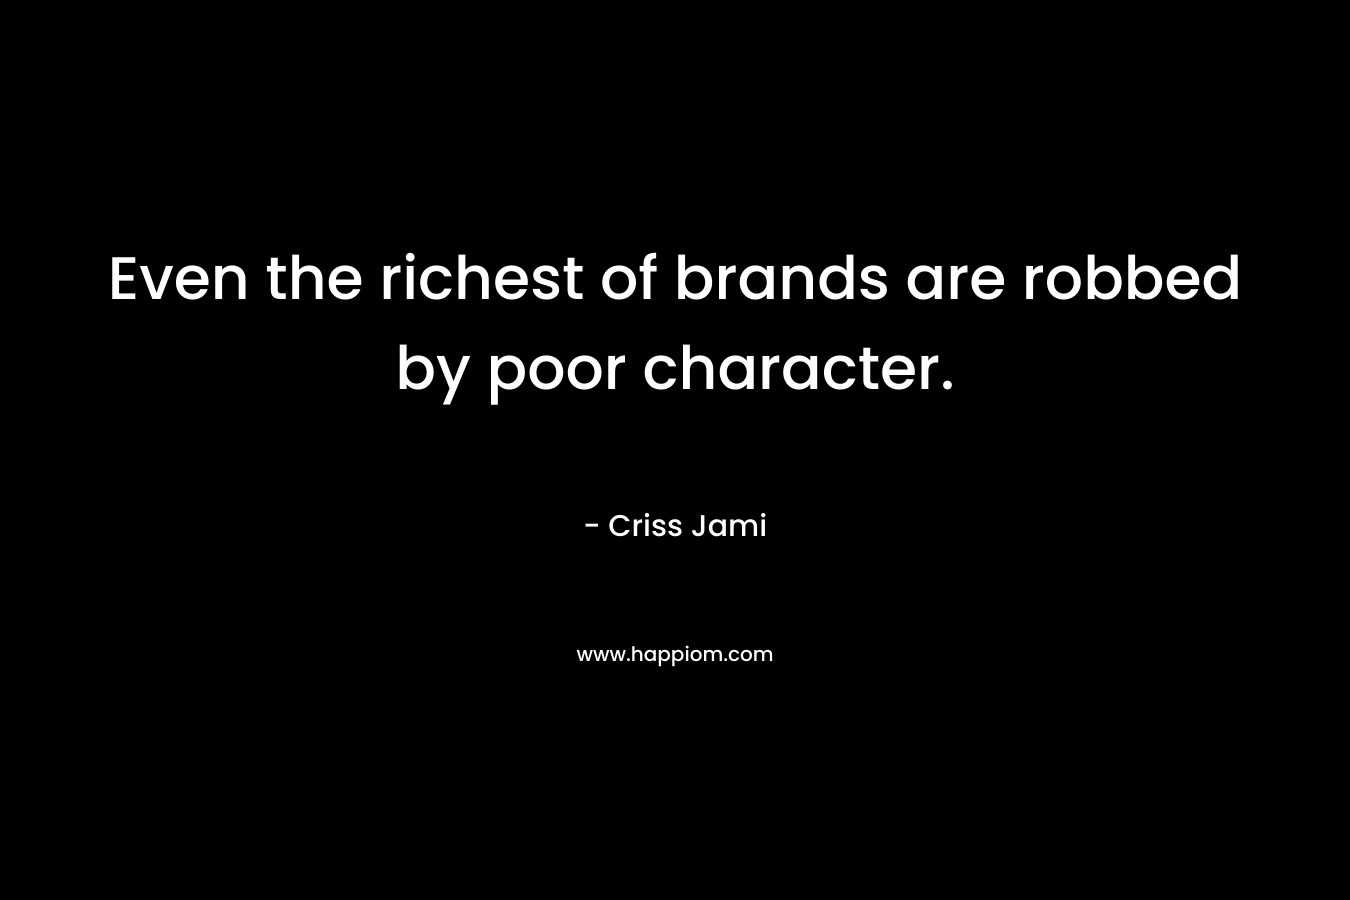 Even the richest of brands are robbed by poor character.